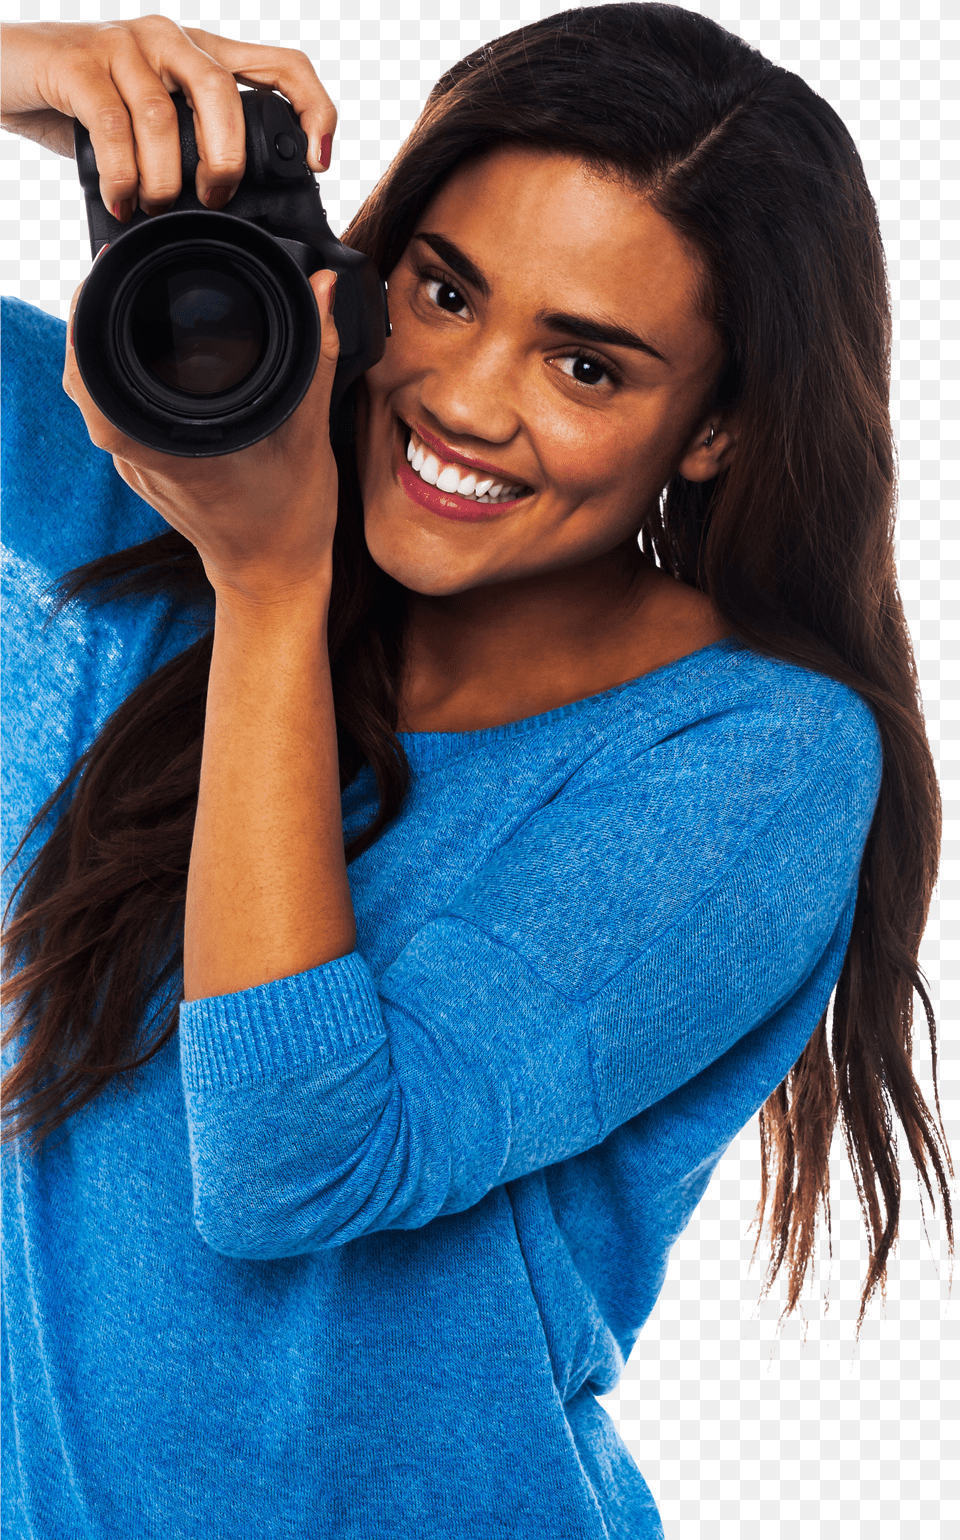 Photographer Commercial Use Image Camera With Girl Pic Free Png Download